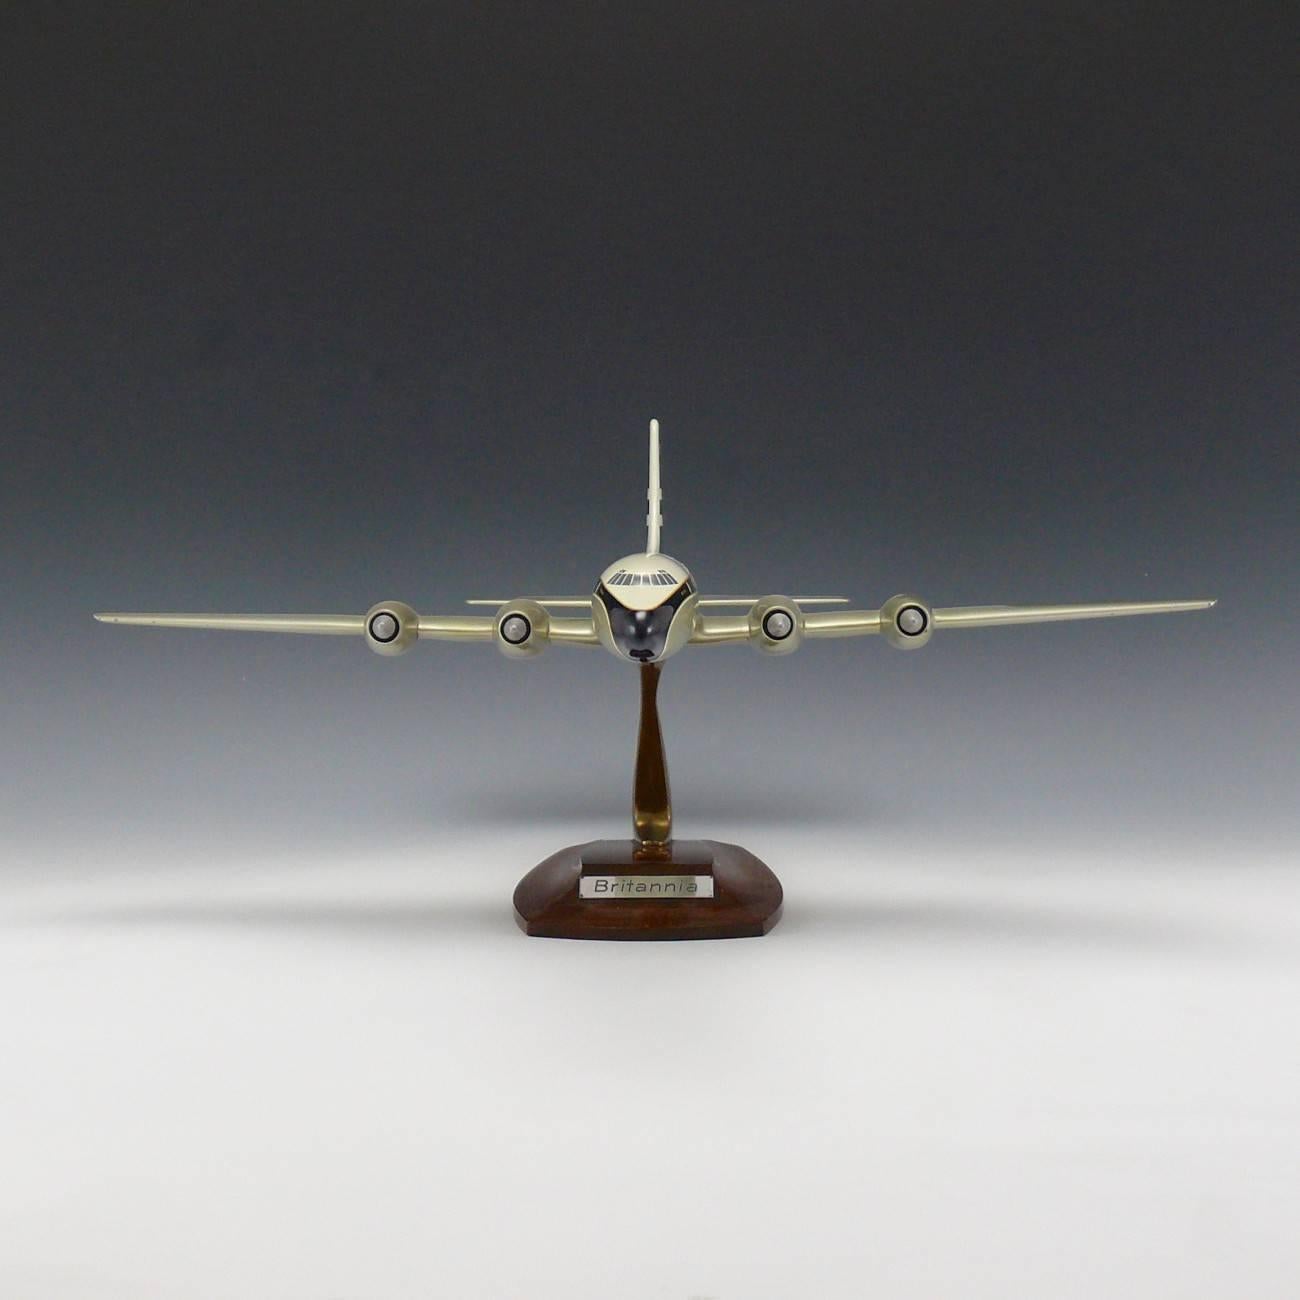 A superb painted aluminium model of a Bristol Britannia in BOAC livery, mounted on original stand with wooden base. By Walker's Westway Models, circa 1957.

Dimensions: 53 cm/20¾ inches (length) x 59 cm/23¼ inches (wing span) x 25.5 cm/10 inches